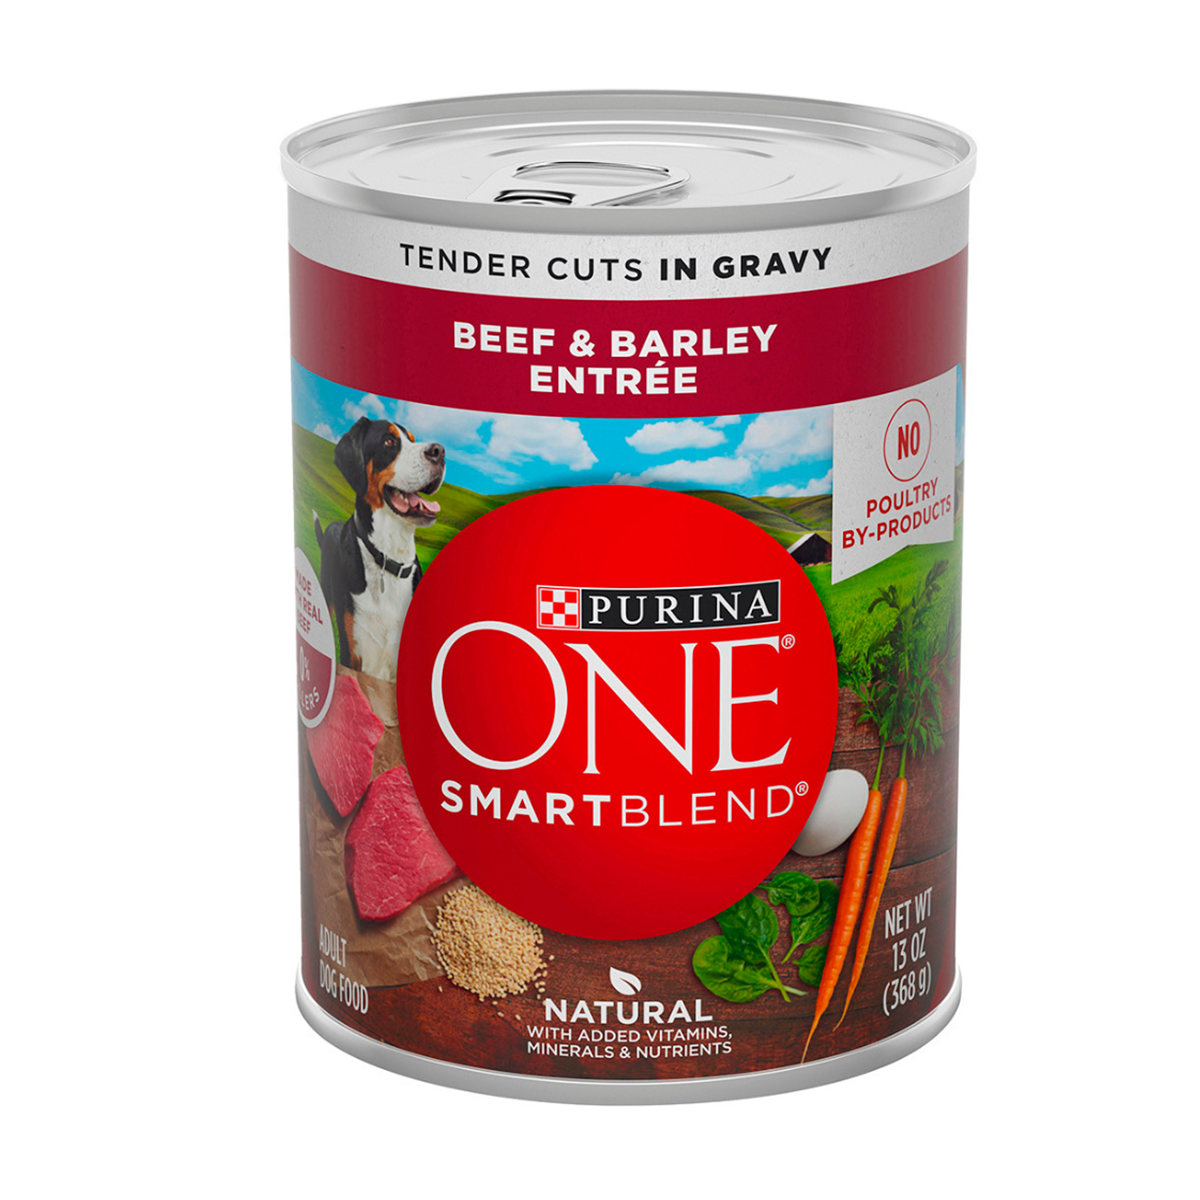 purina-one-wet-beef-%26-barly-entr%C3%A9e-tender-cuts-in-gravy.png